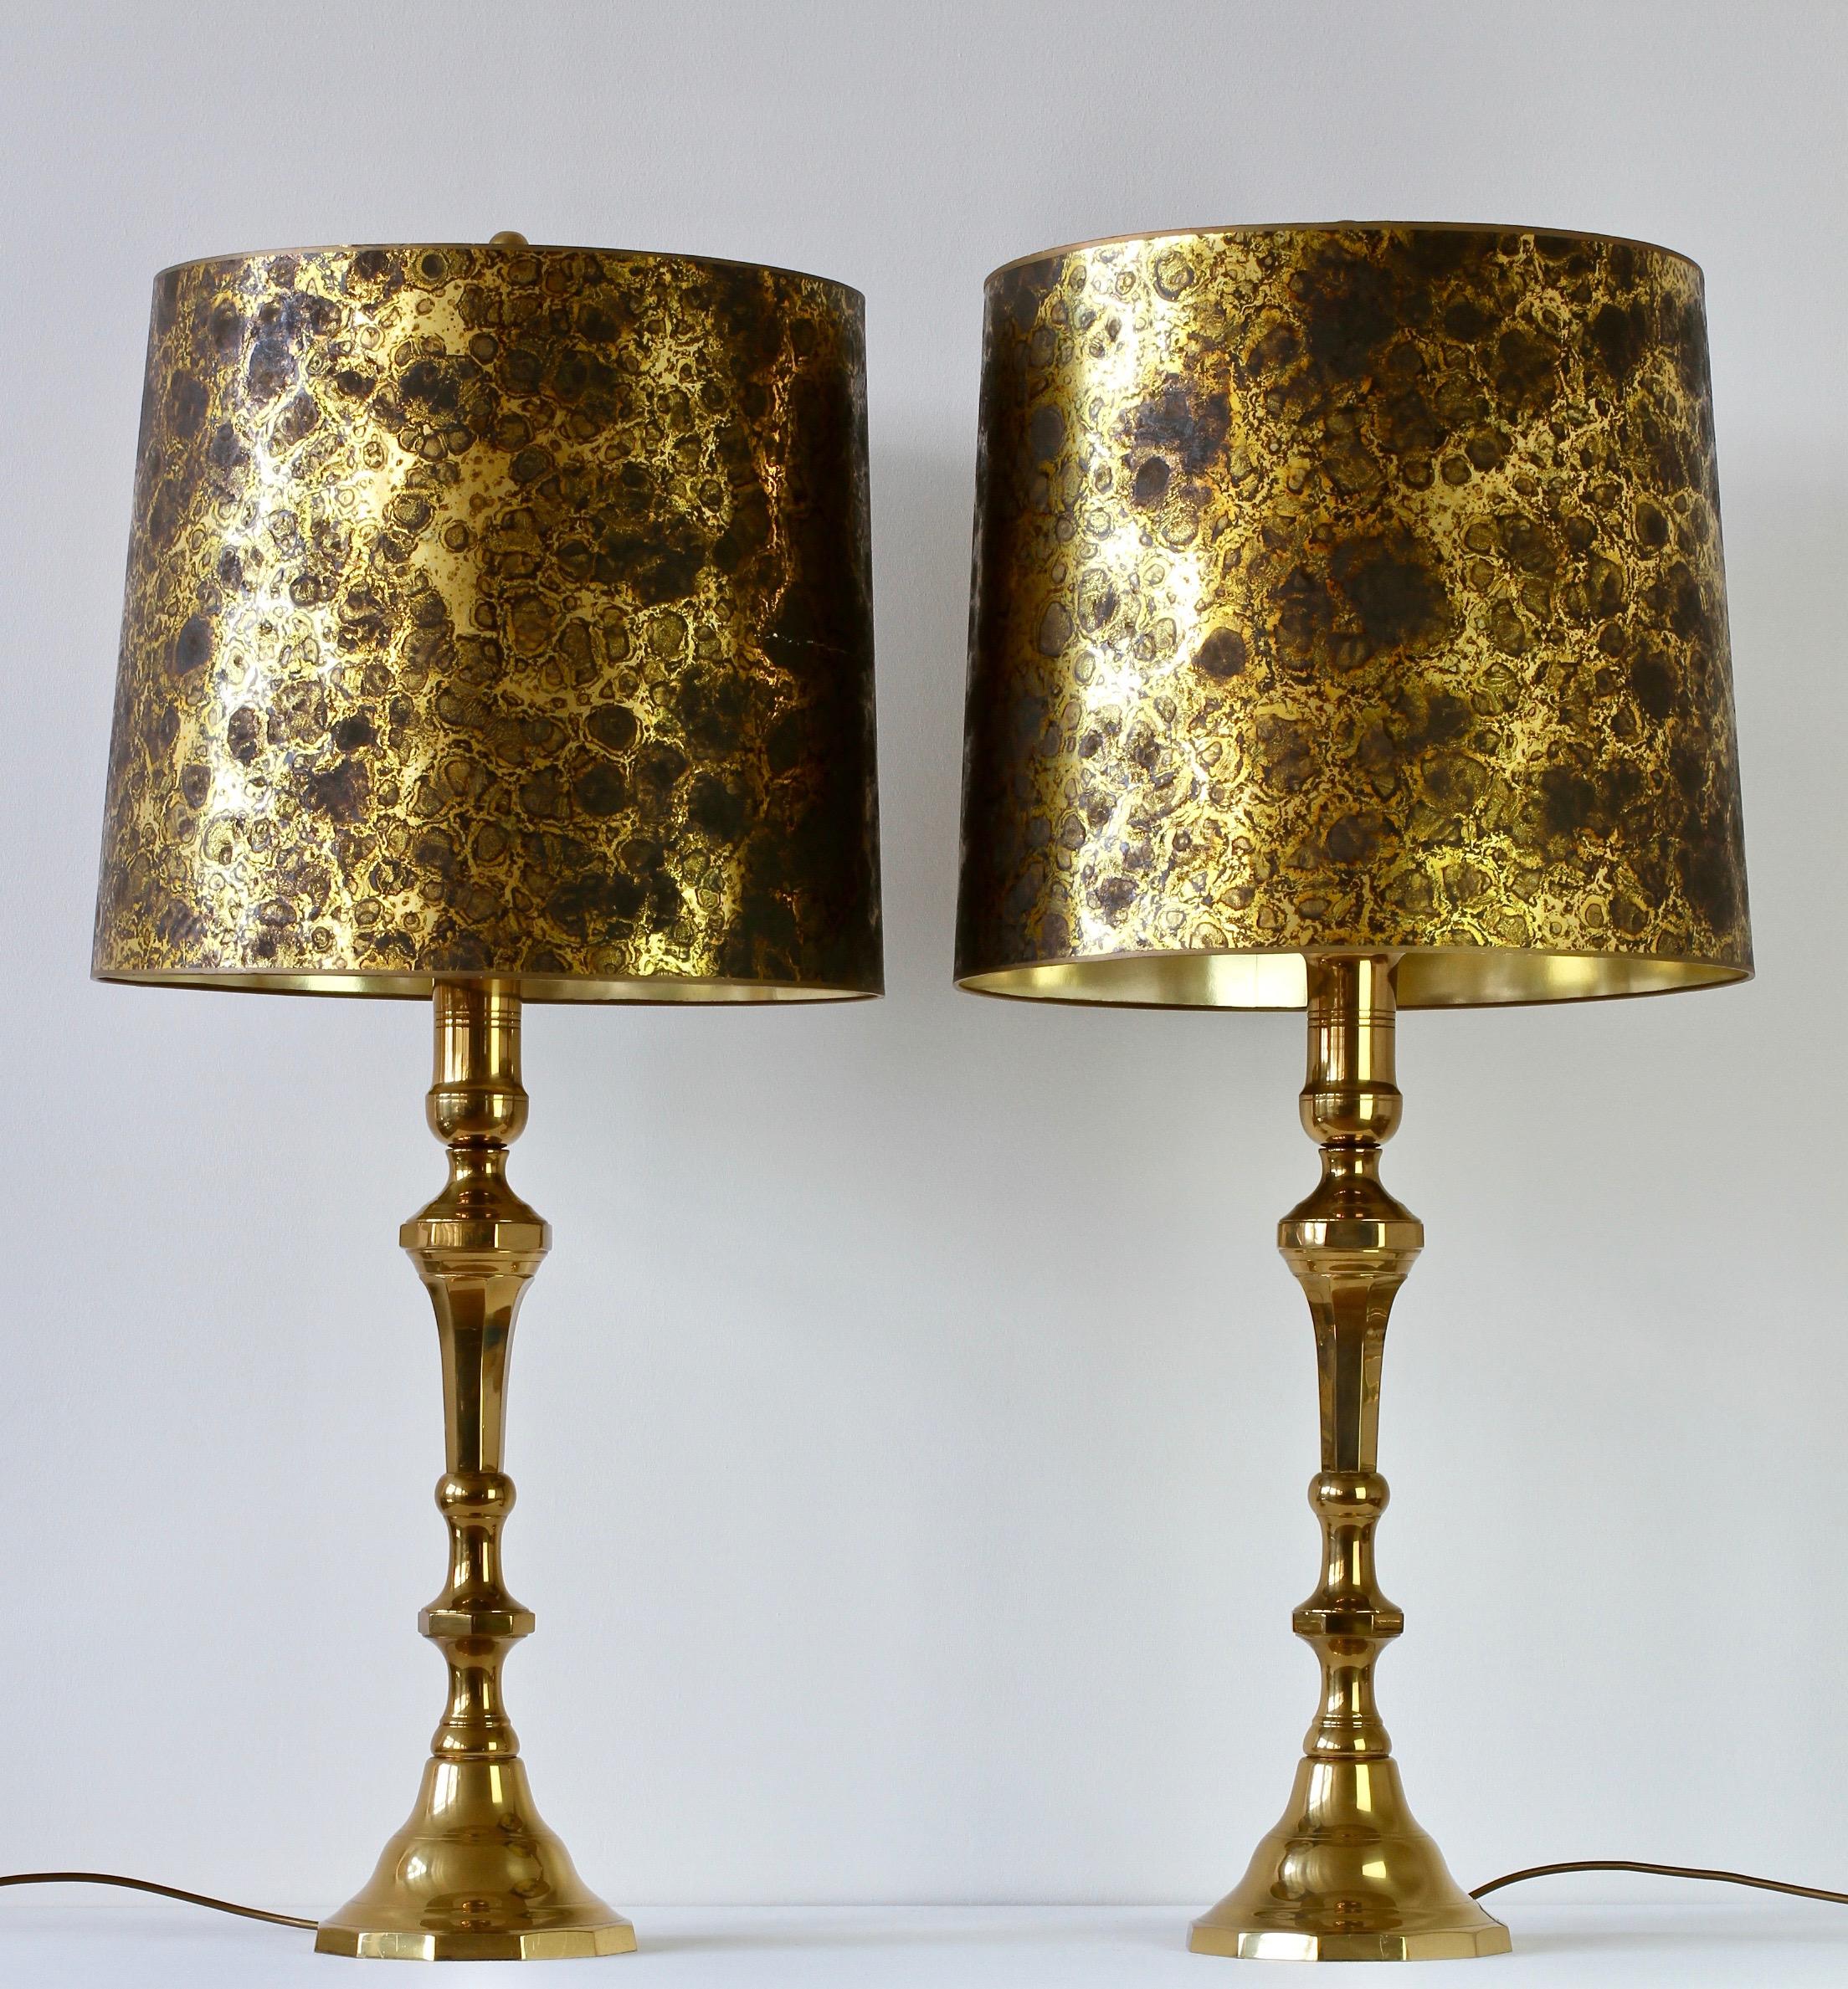 Monumental and tall Mid-Century Modern pair of oversized, large-scale table or floor lamps in the style of Maison Jansen, circa 1970s. Featuring cast polished brass, these lamps lend themselves to any modern home decor as well as the Mid-Century